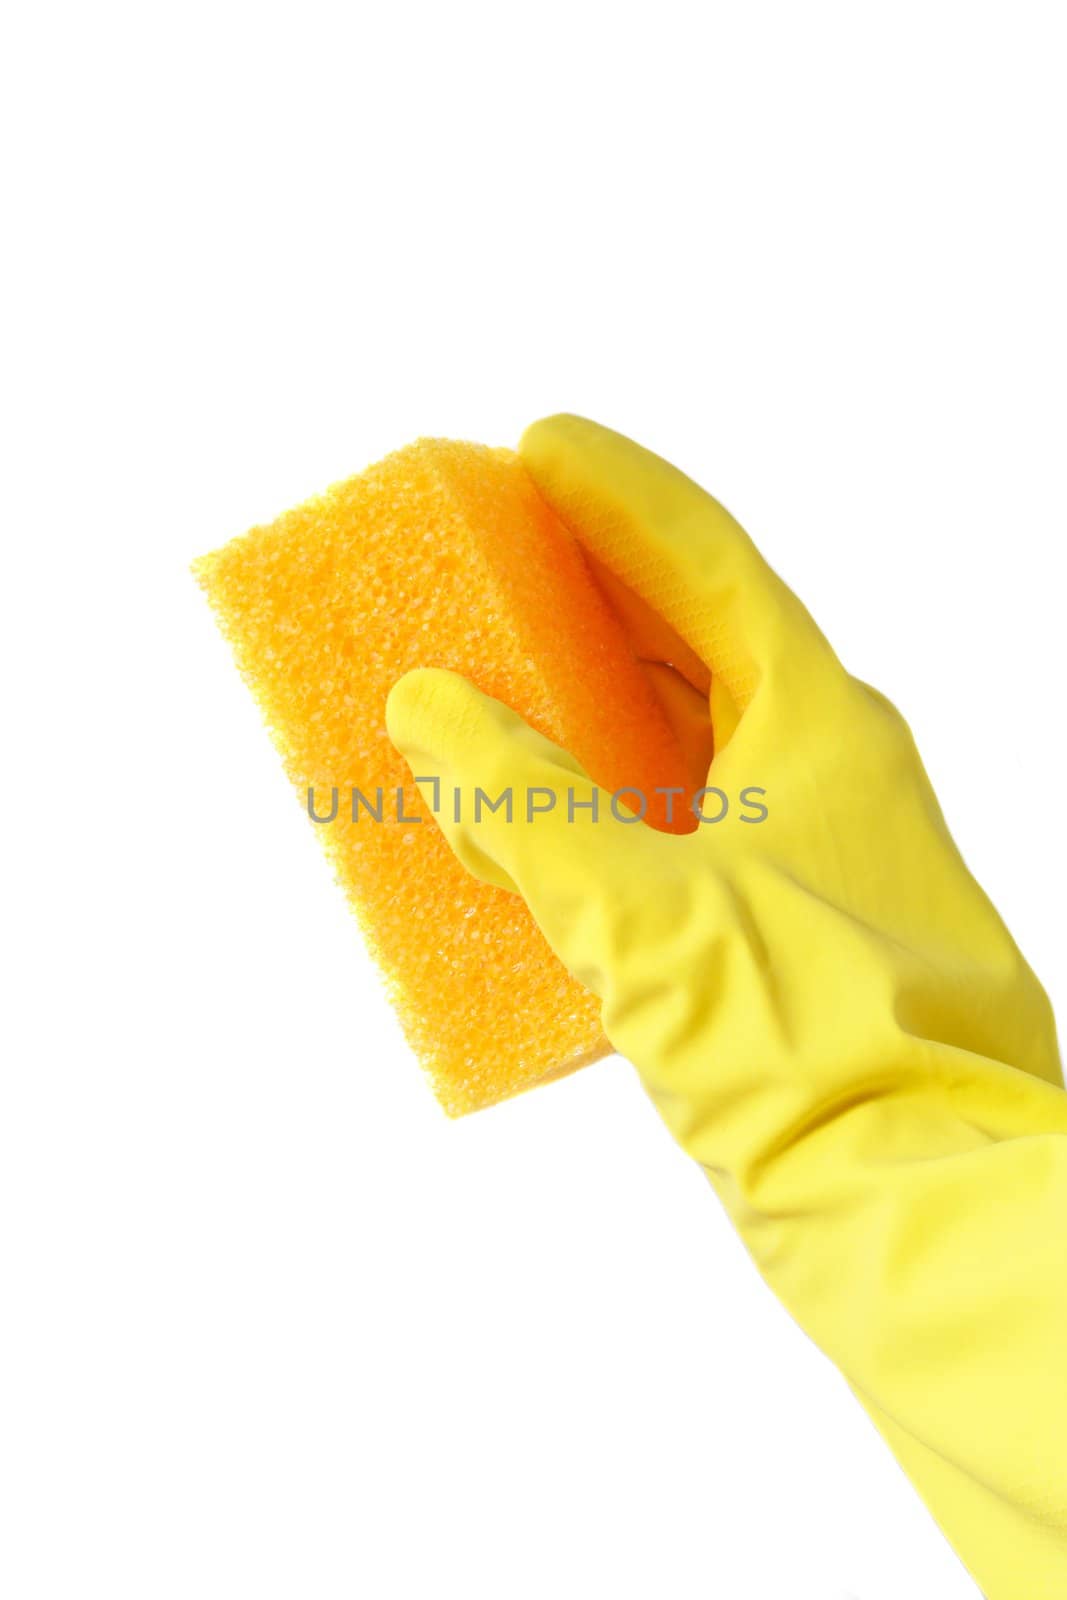 A cleaner holding a sponge. All isolated on white background.